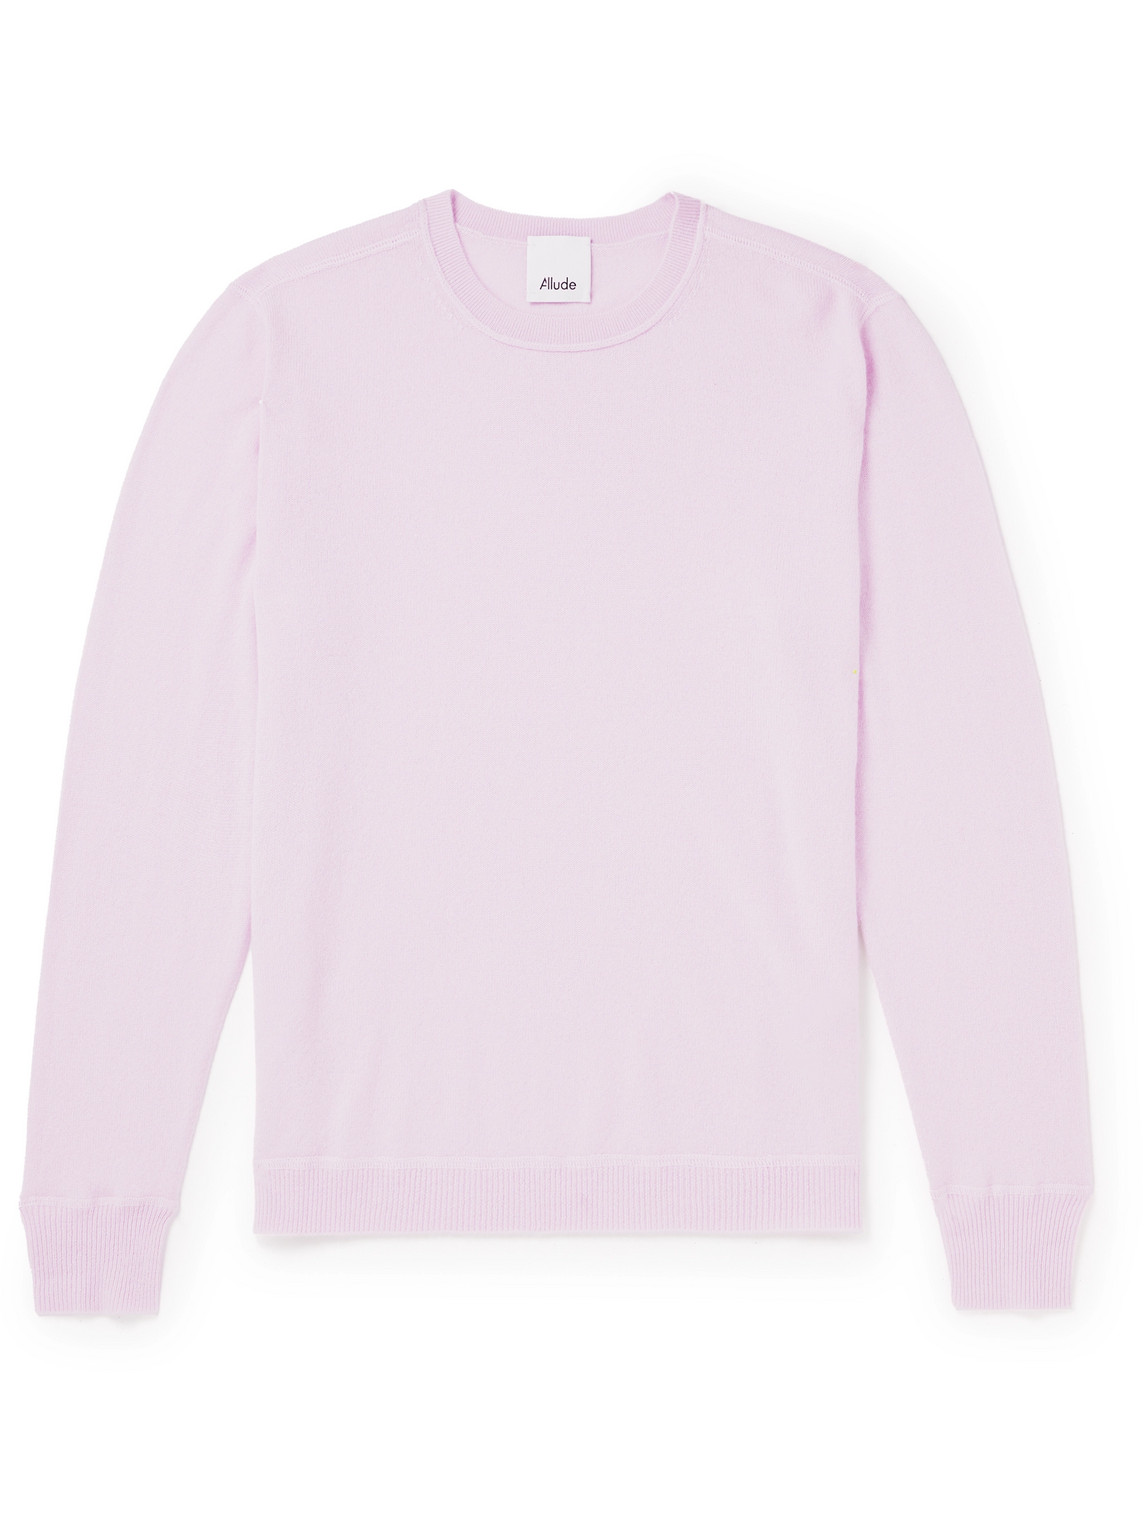 Allude Cashmere Jumper In Pink